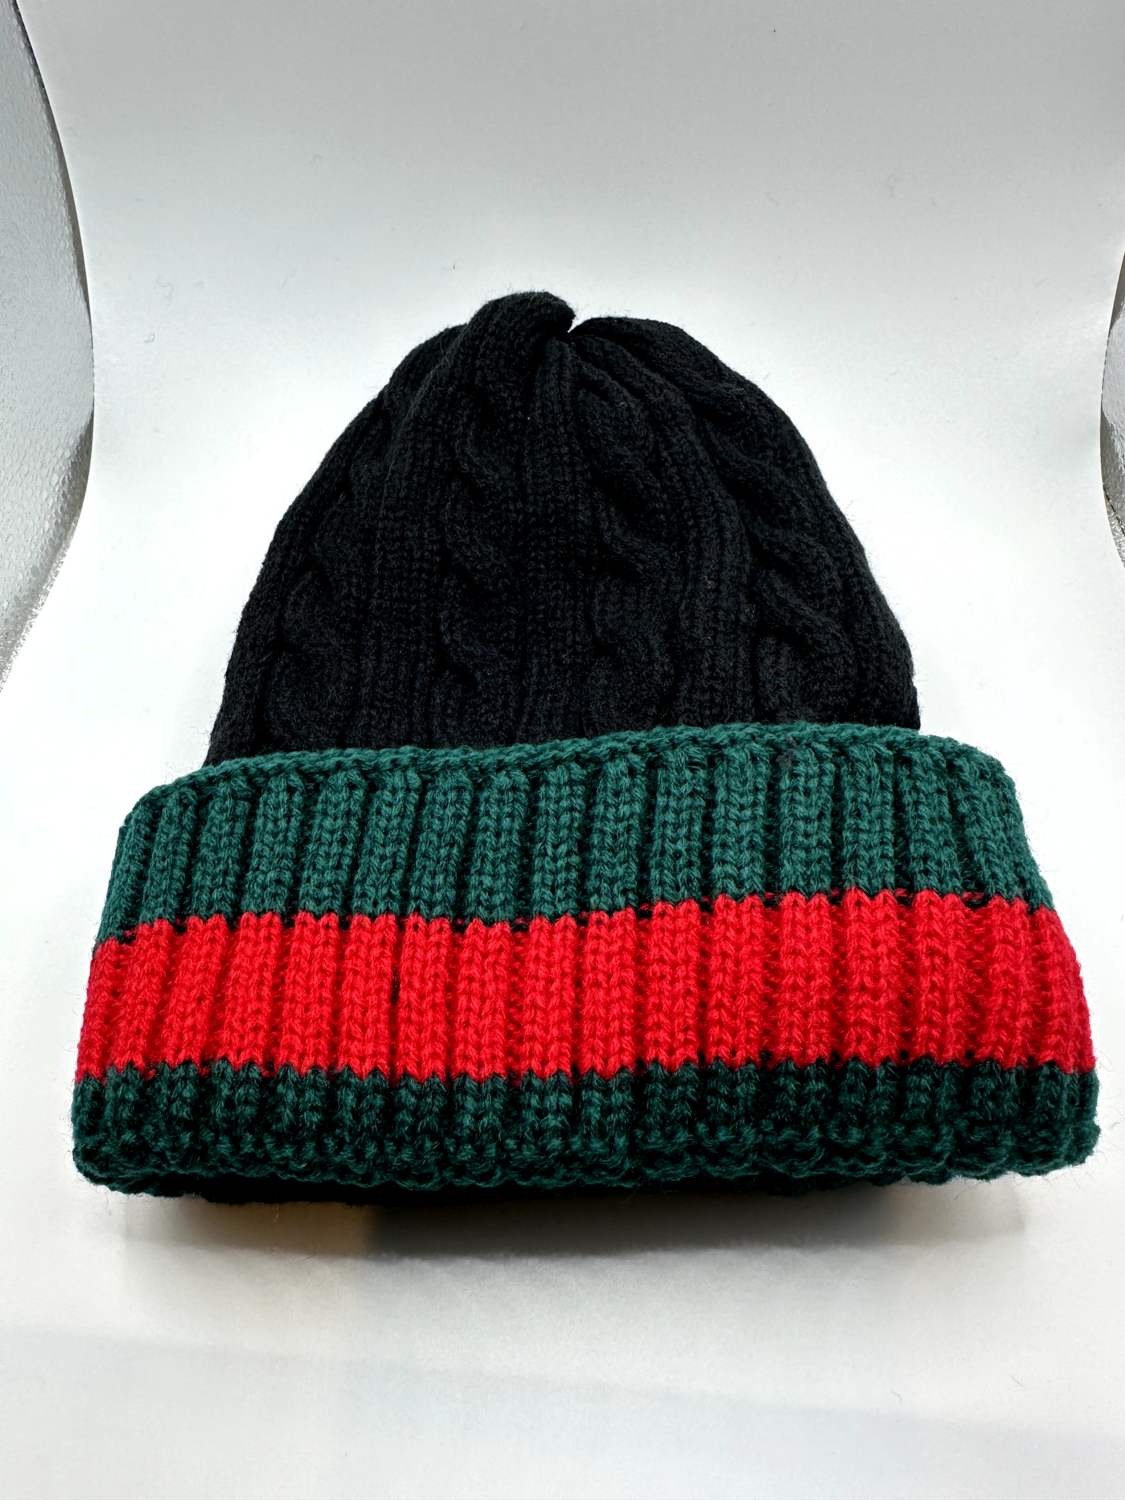 Beanie - Black/Green/Red Colors